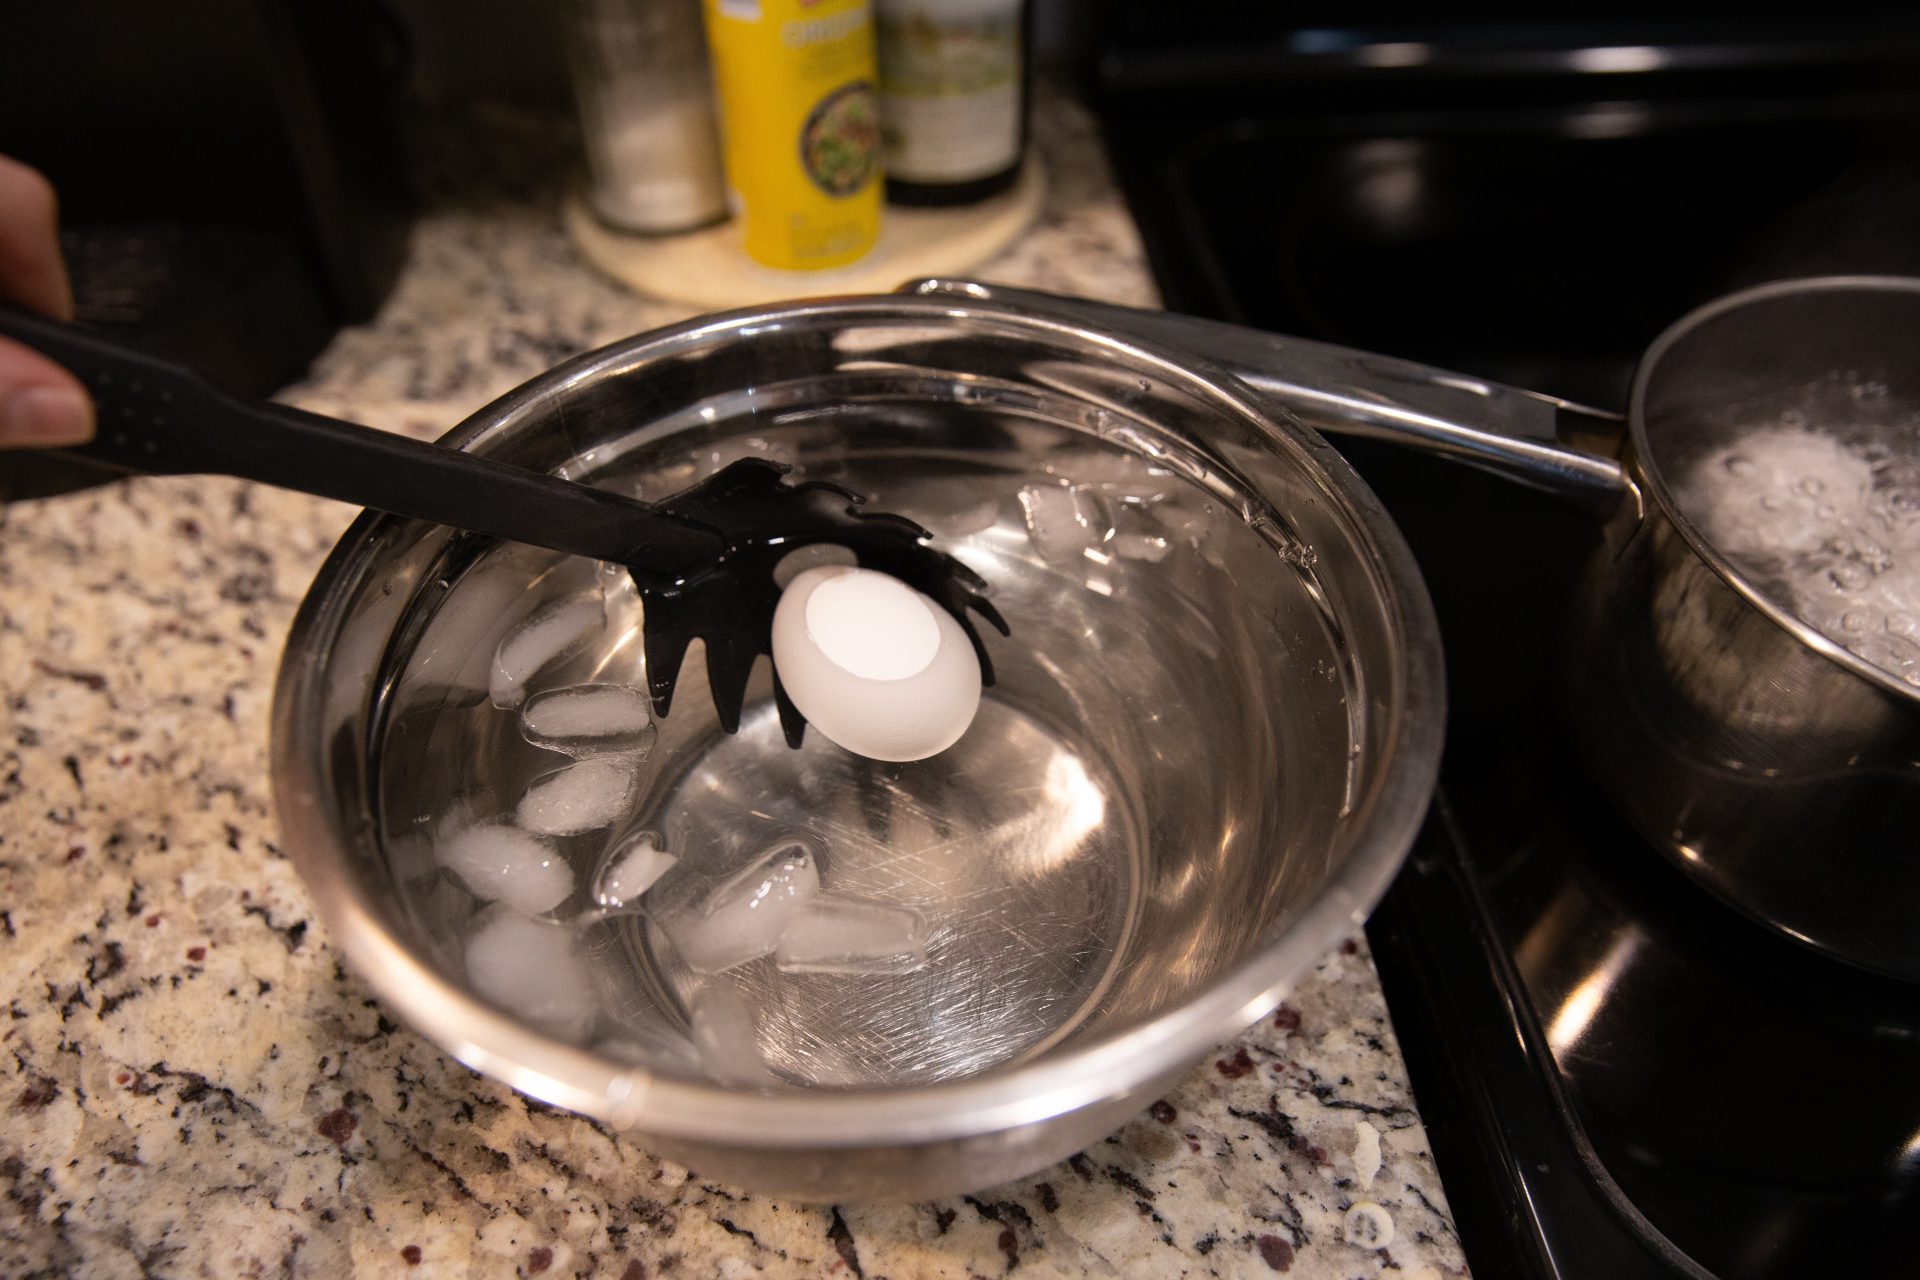 Boiled egg being dropped in ice water.